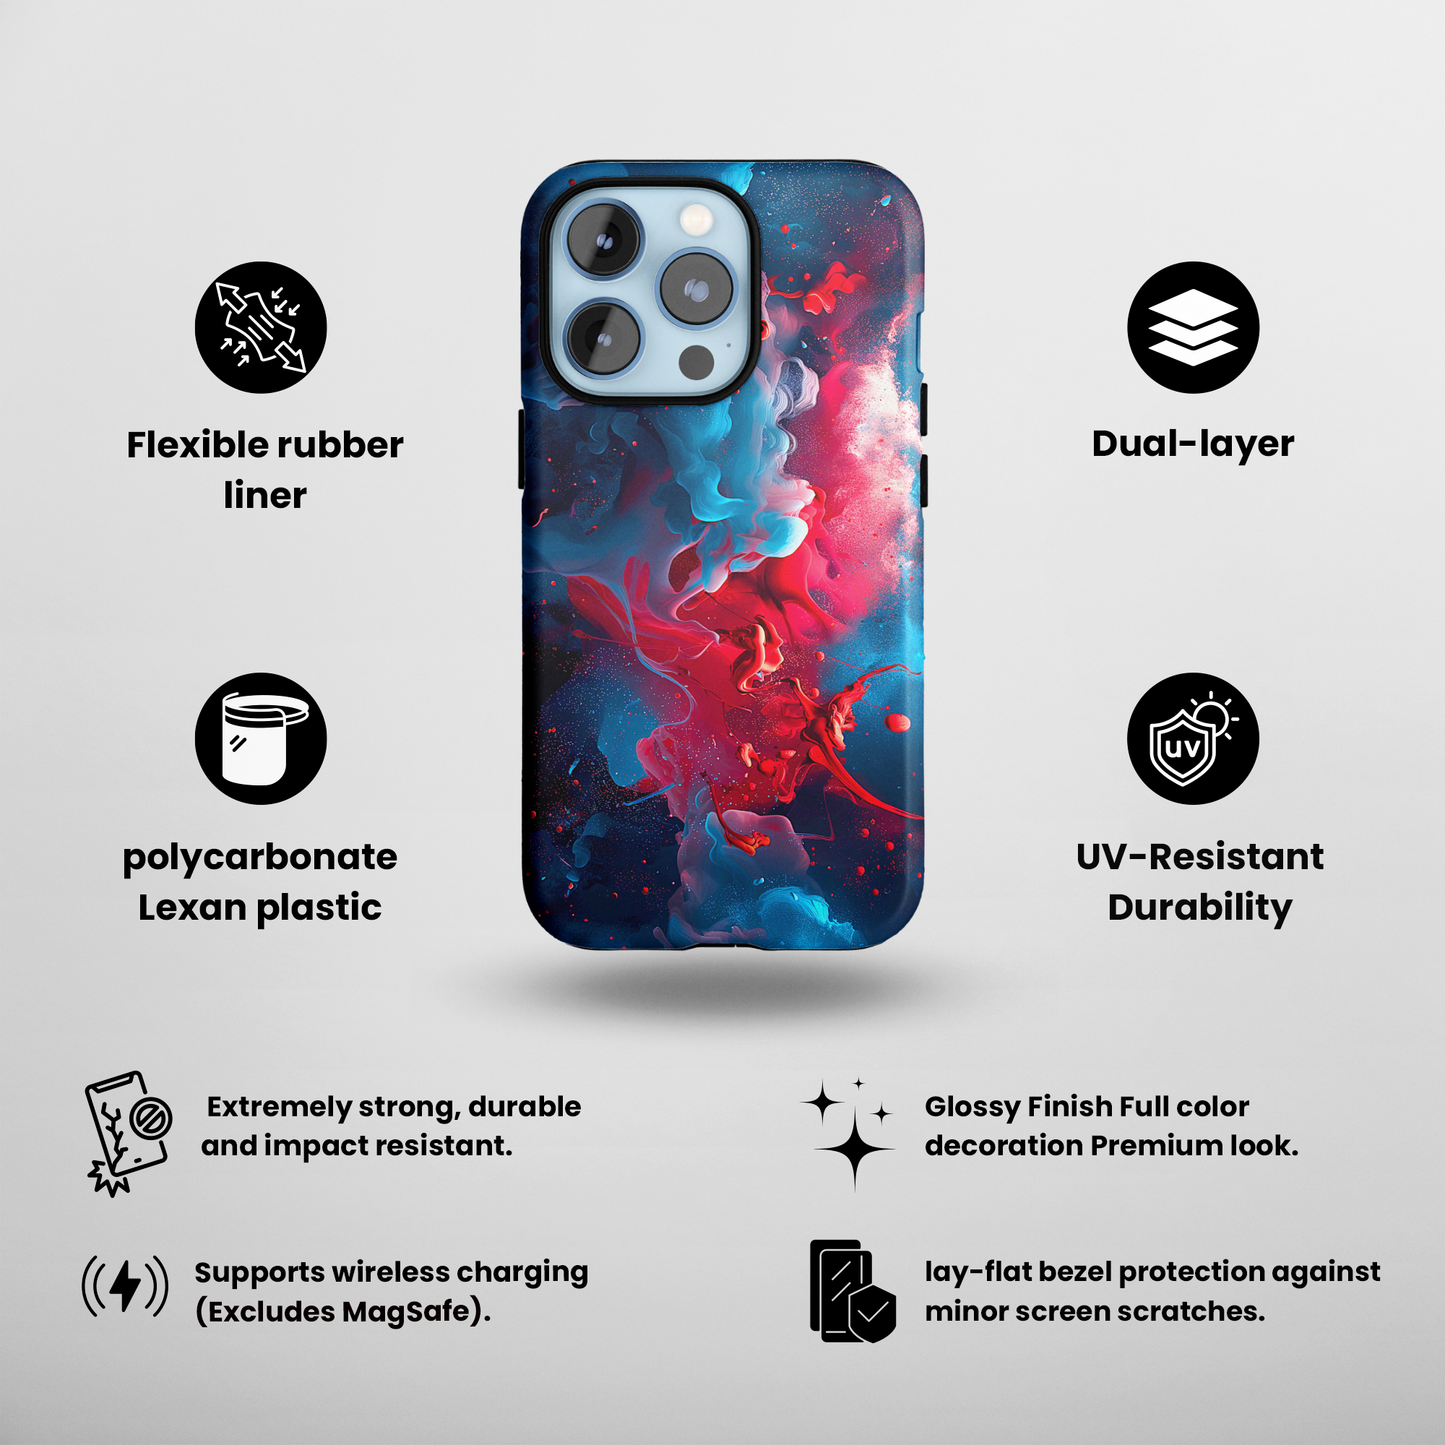 Nebular Fusion (iPhone Case 11-15)Elevate your iPhone's protection and style with RimaGallery's Mystic fusion of nebula-like colors swirling On case, featuring dual-layer defense and a sleek, glossy RimaGallery